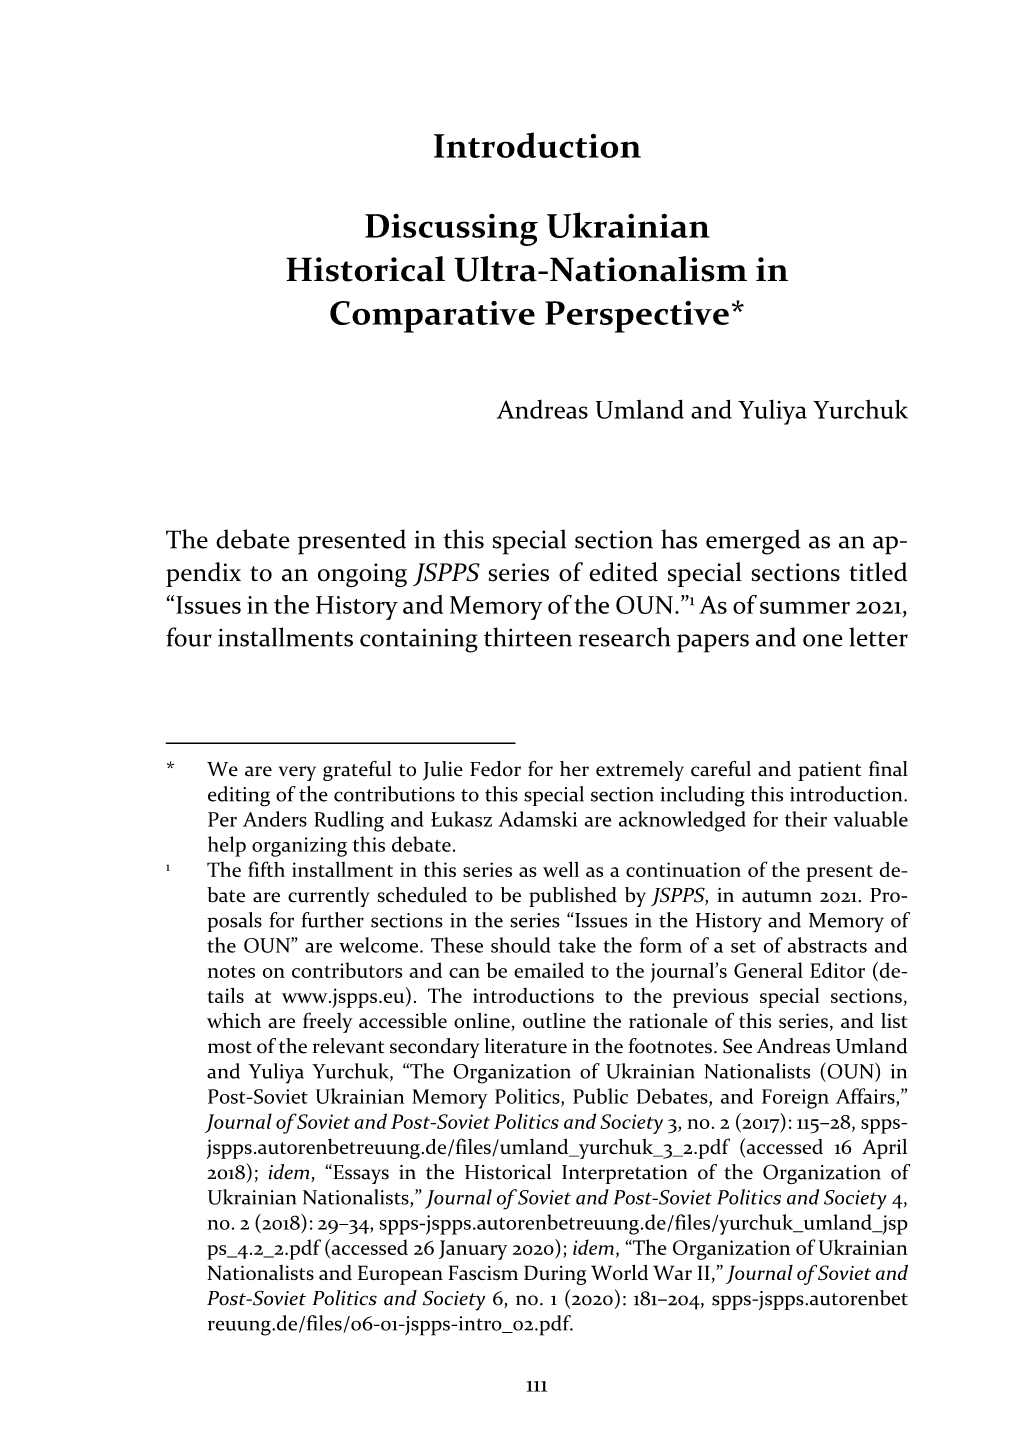 Introduction Discussing Ukrainian Historical Ultra-Nationalism in Comparative Perspective